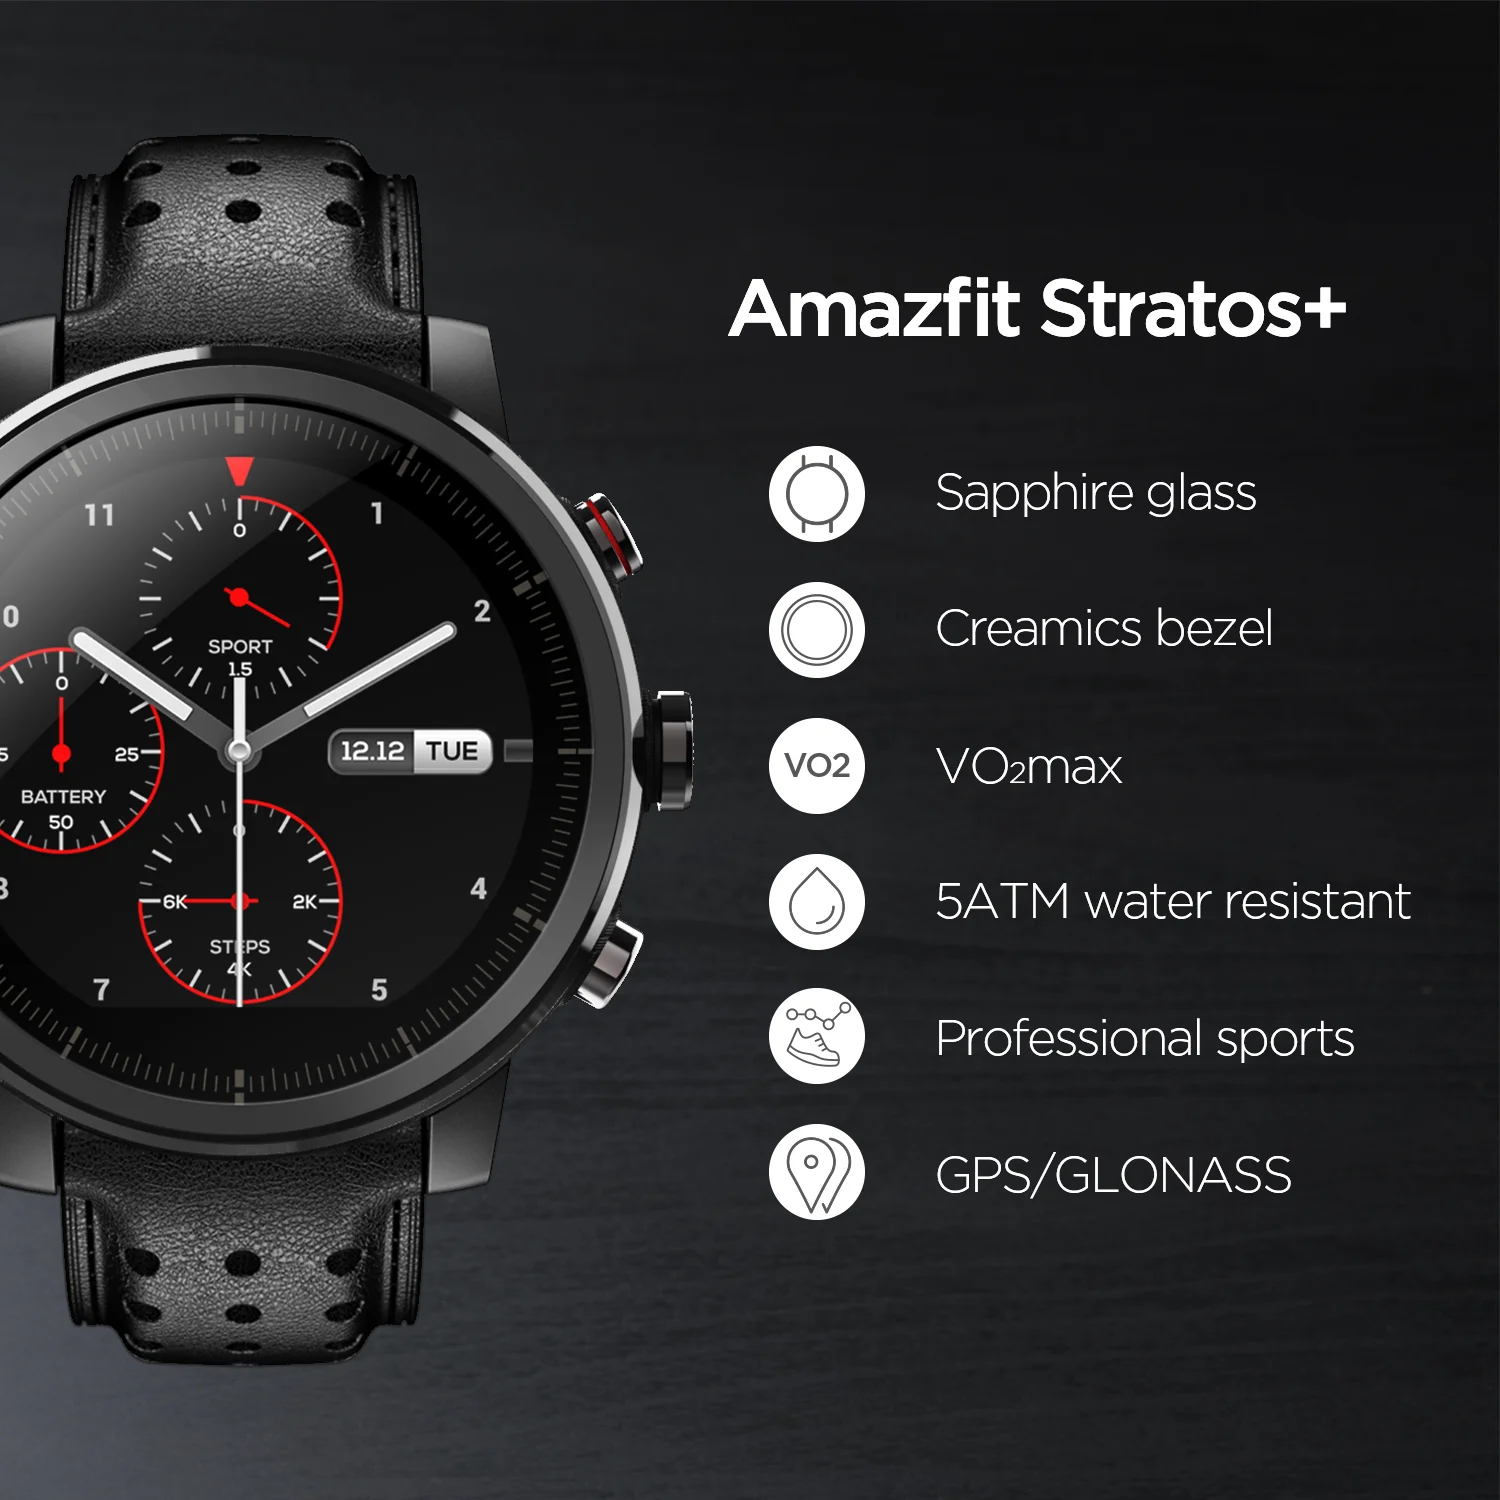 2019 New Amazfit Stratos+ Flagship Smart Watch Genuie Leather Strap Gift Box Sapphire 2S